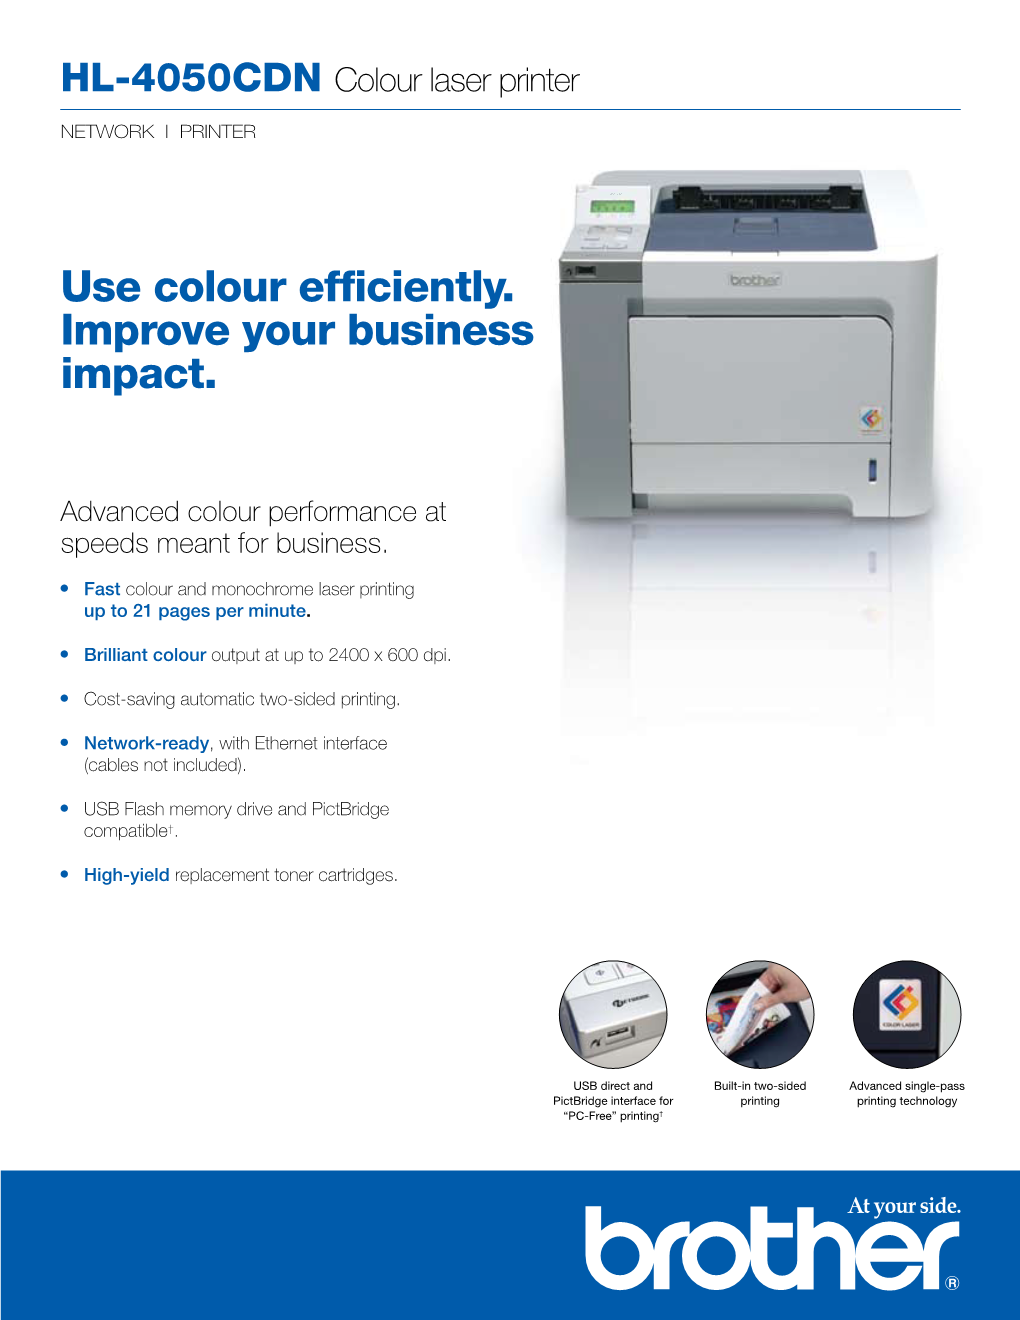 Use Colour Efficiently. Improve Your Business Impact